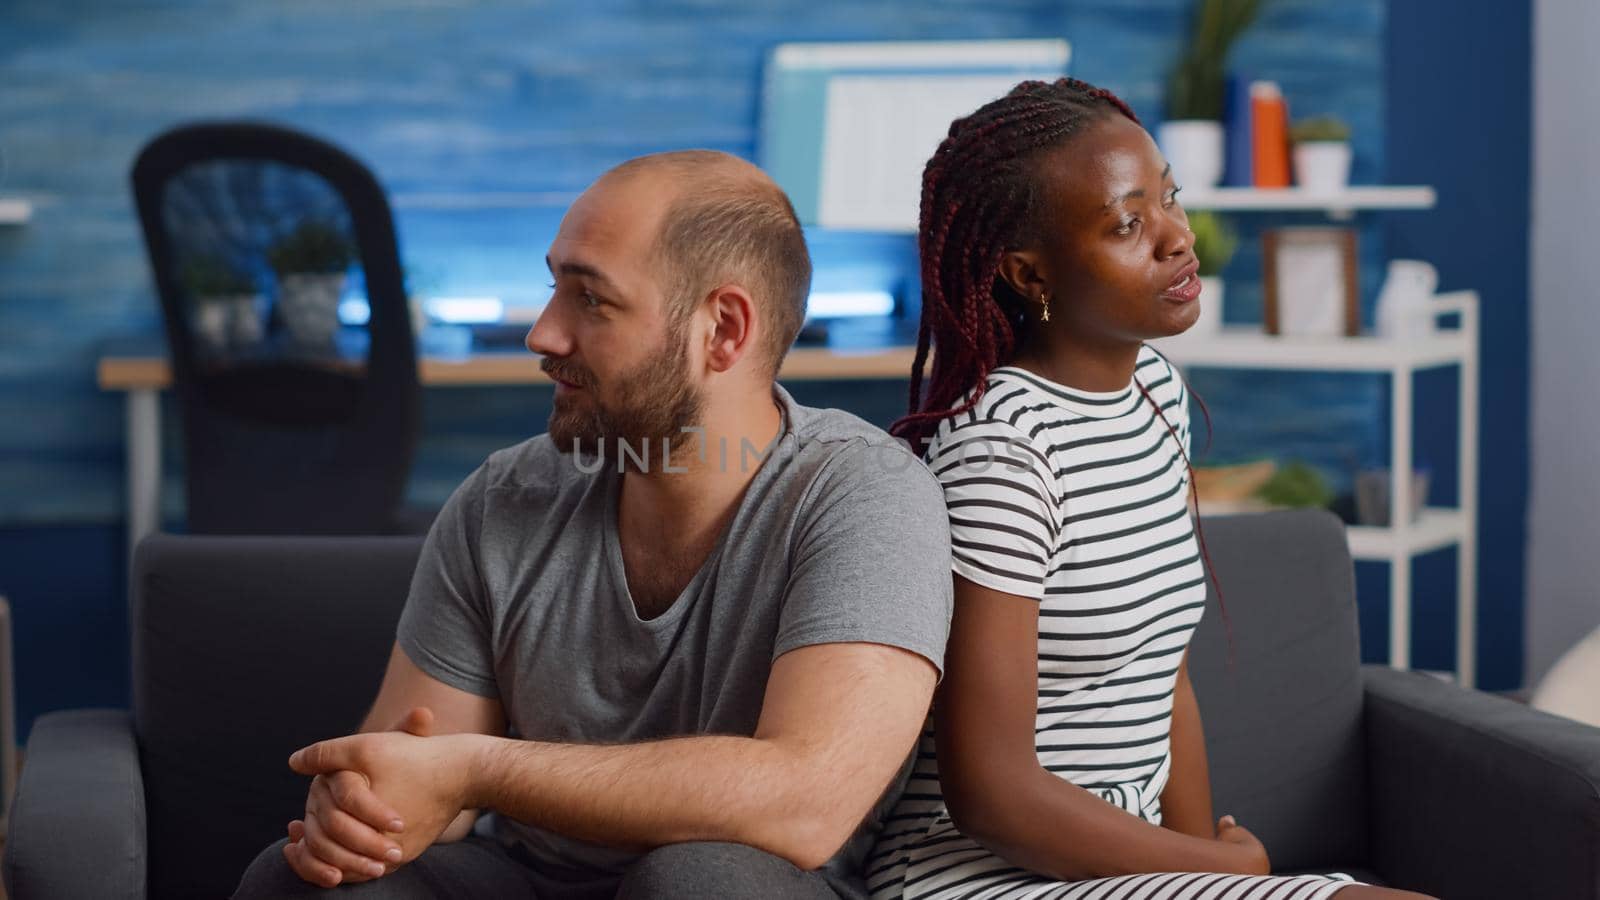 Irritated interracial couple fighting and sitting on couch at home. Multi ethnic lovers having argument yelling in living room. Angry mixed race people with relationship problems shouting